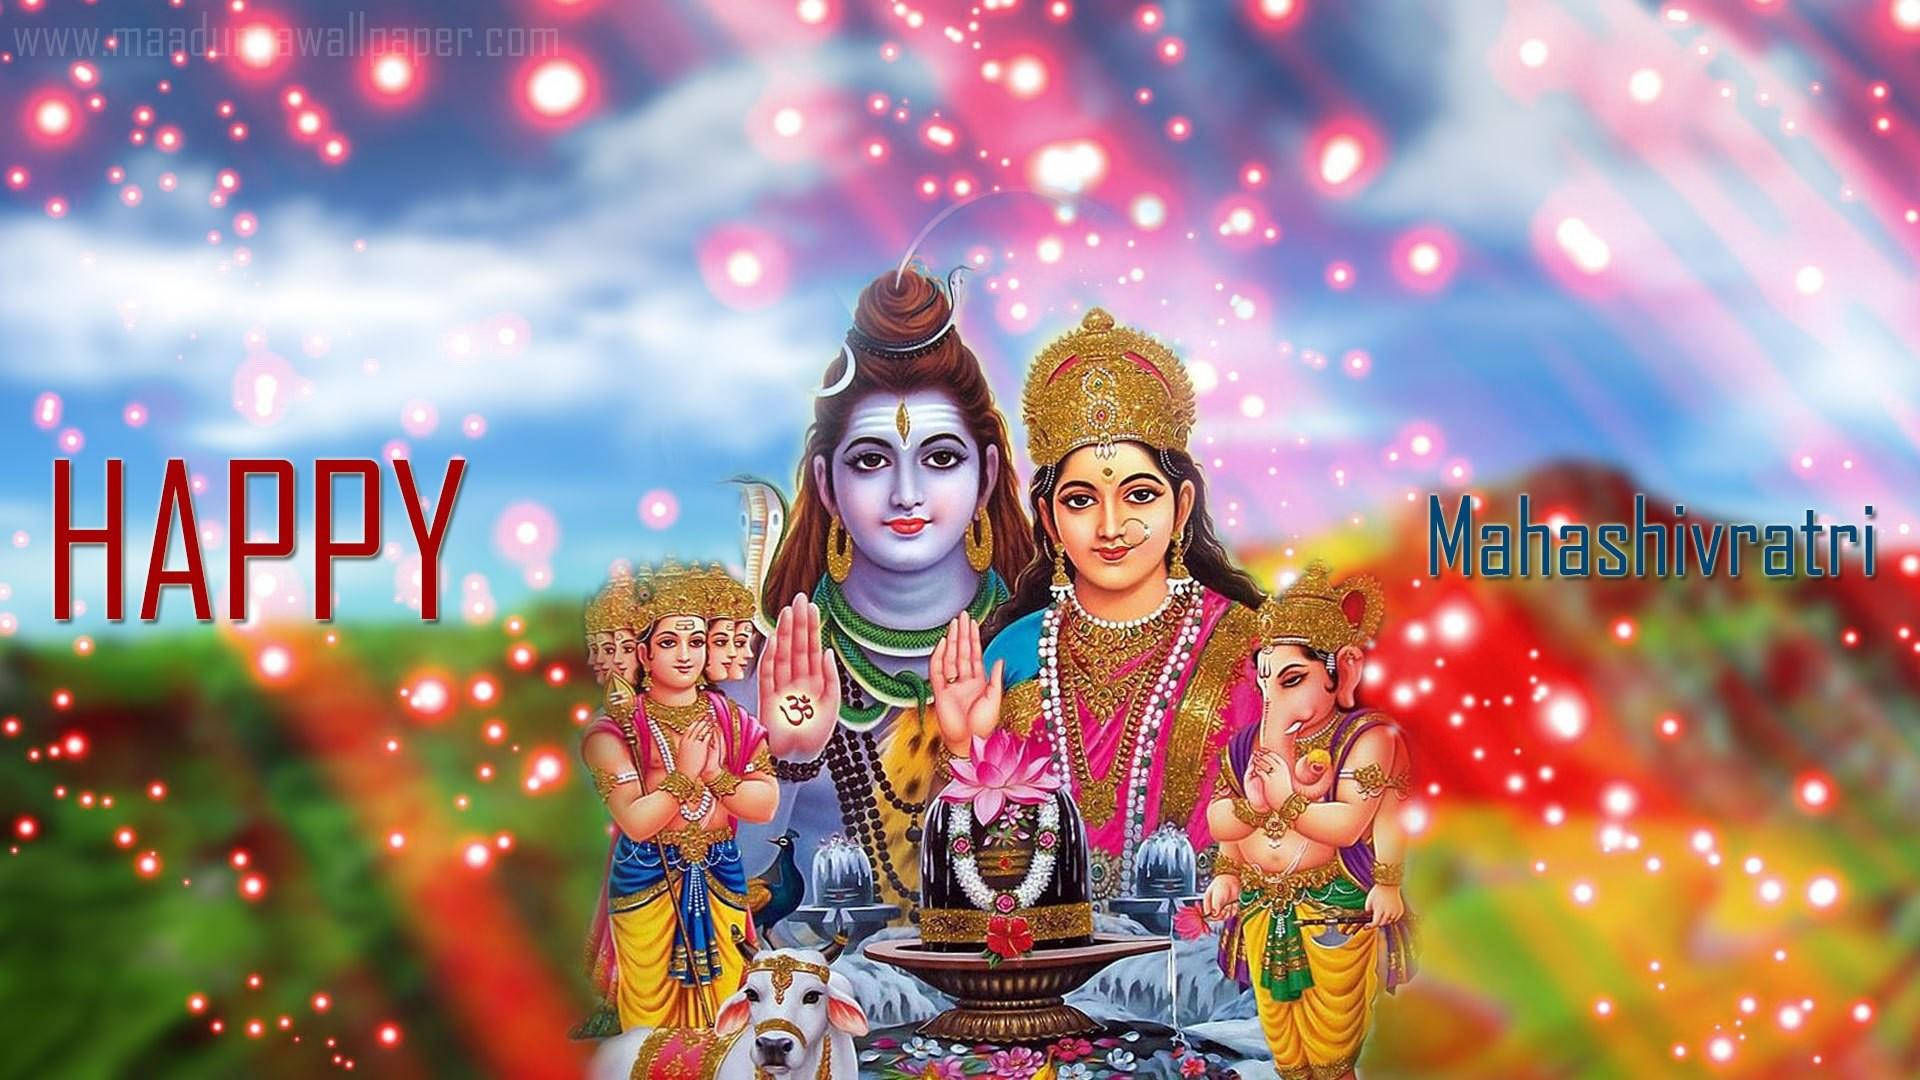 Lord Shiva Family With Red Orbs Background